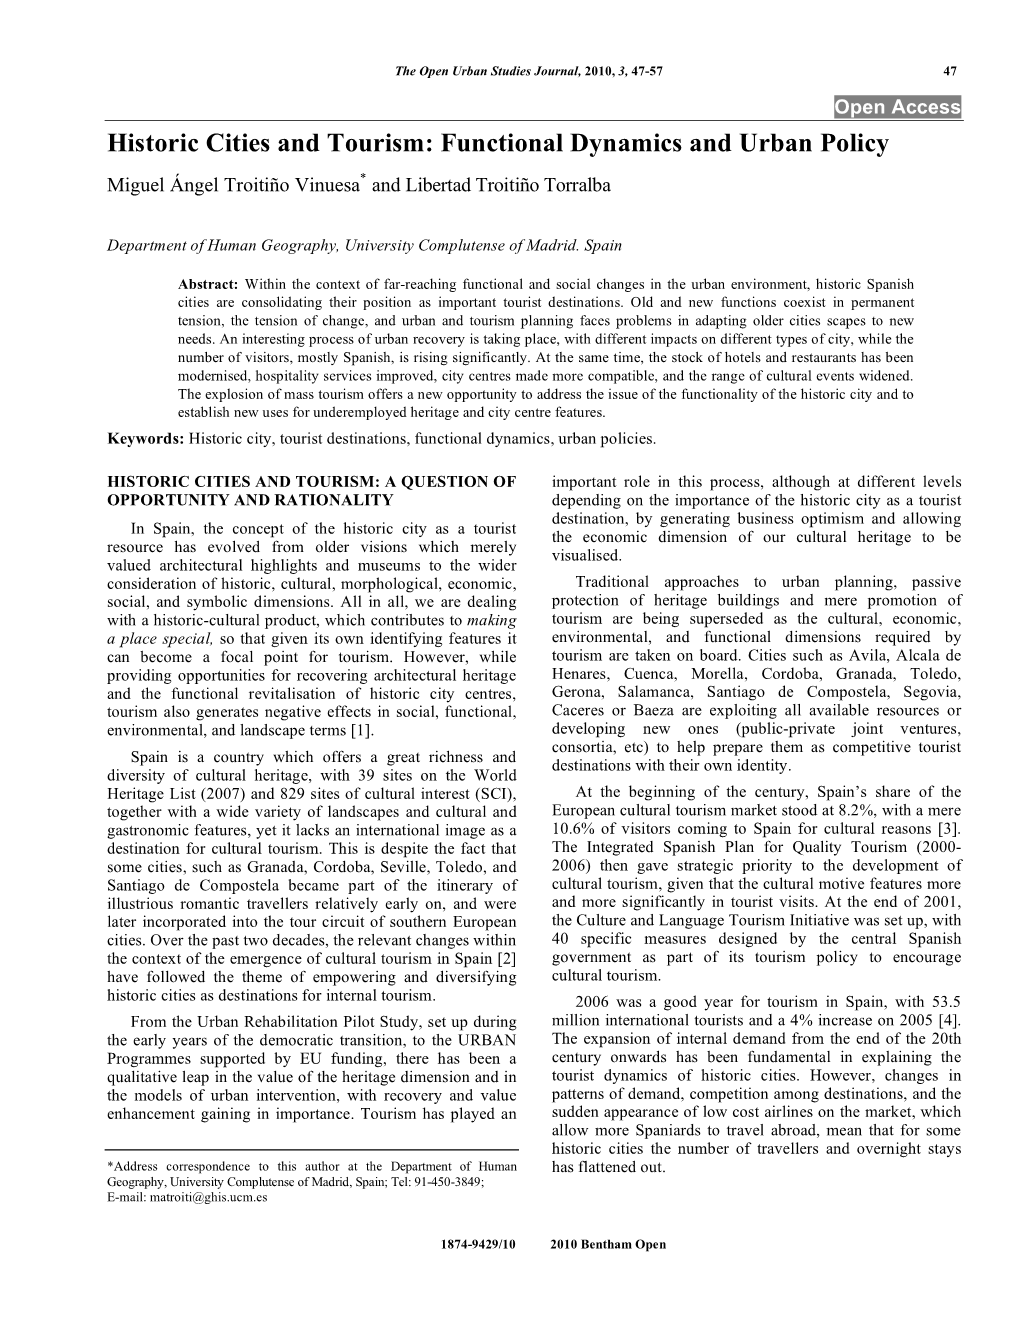 Historic Cities and Tourism: Functional Dynamics and Urban Policy Miguel Ángel Troitiño Vinuesa* and Libertad Troitiño Torralba